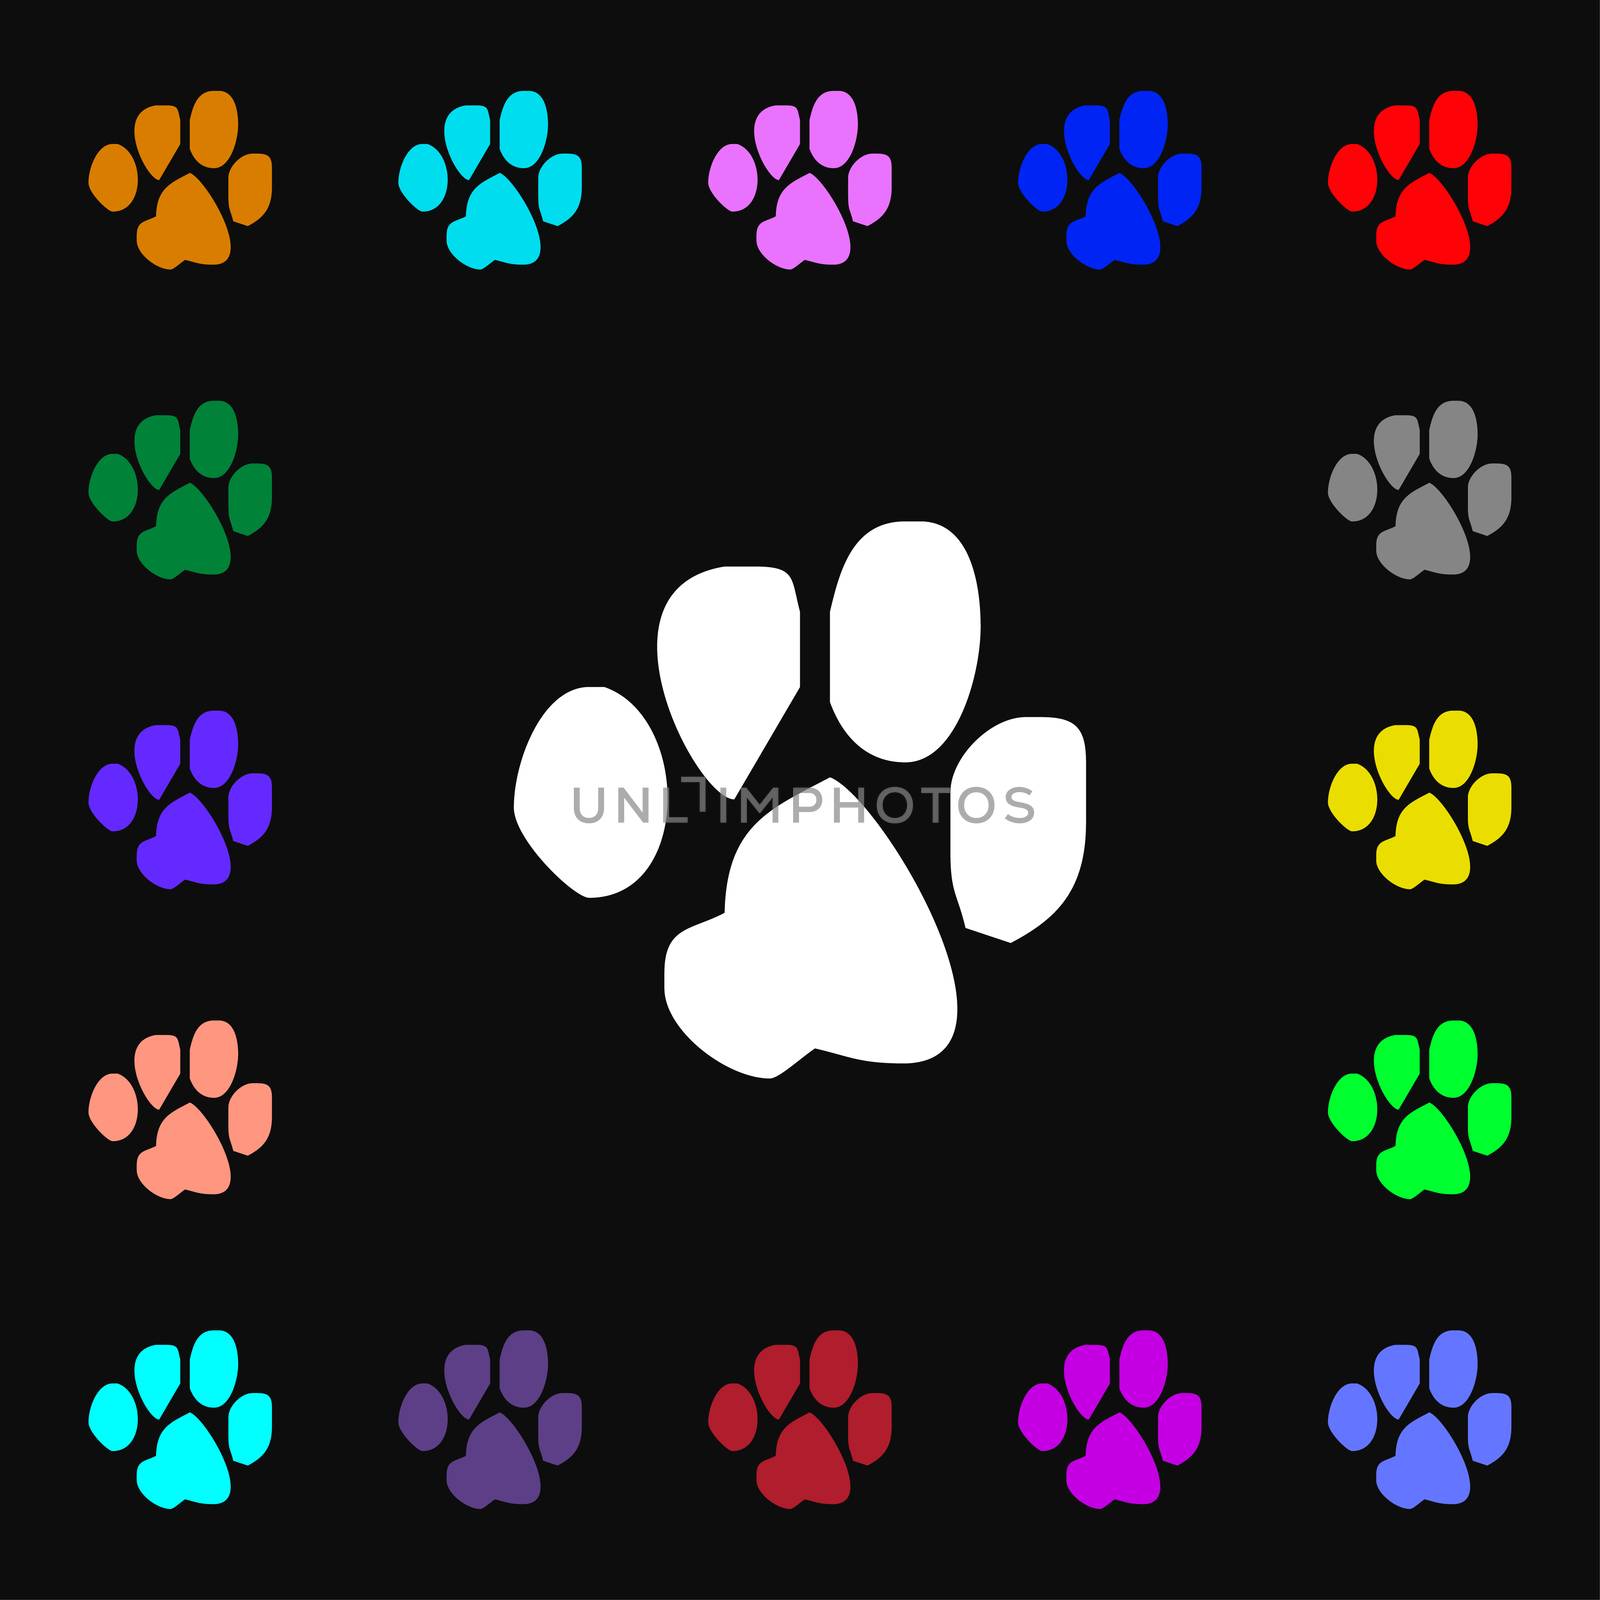 trace dogs icon sign. Lots of colorful symbols for your design. illustration